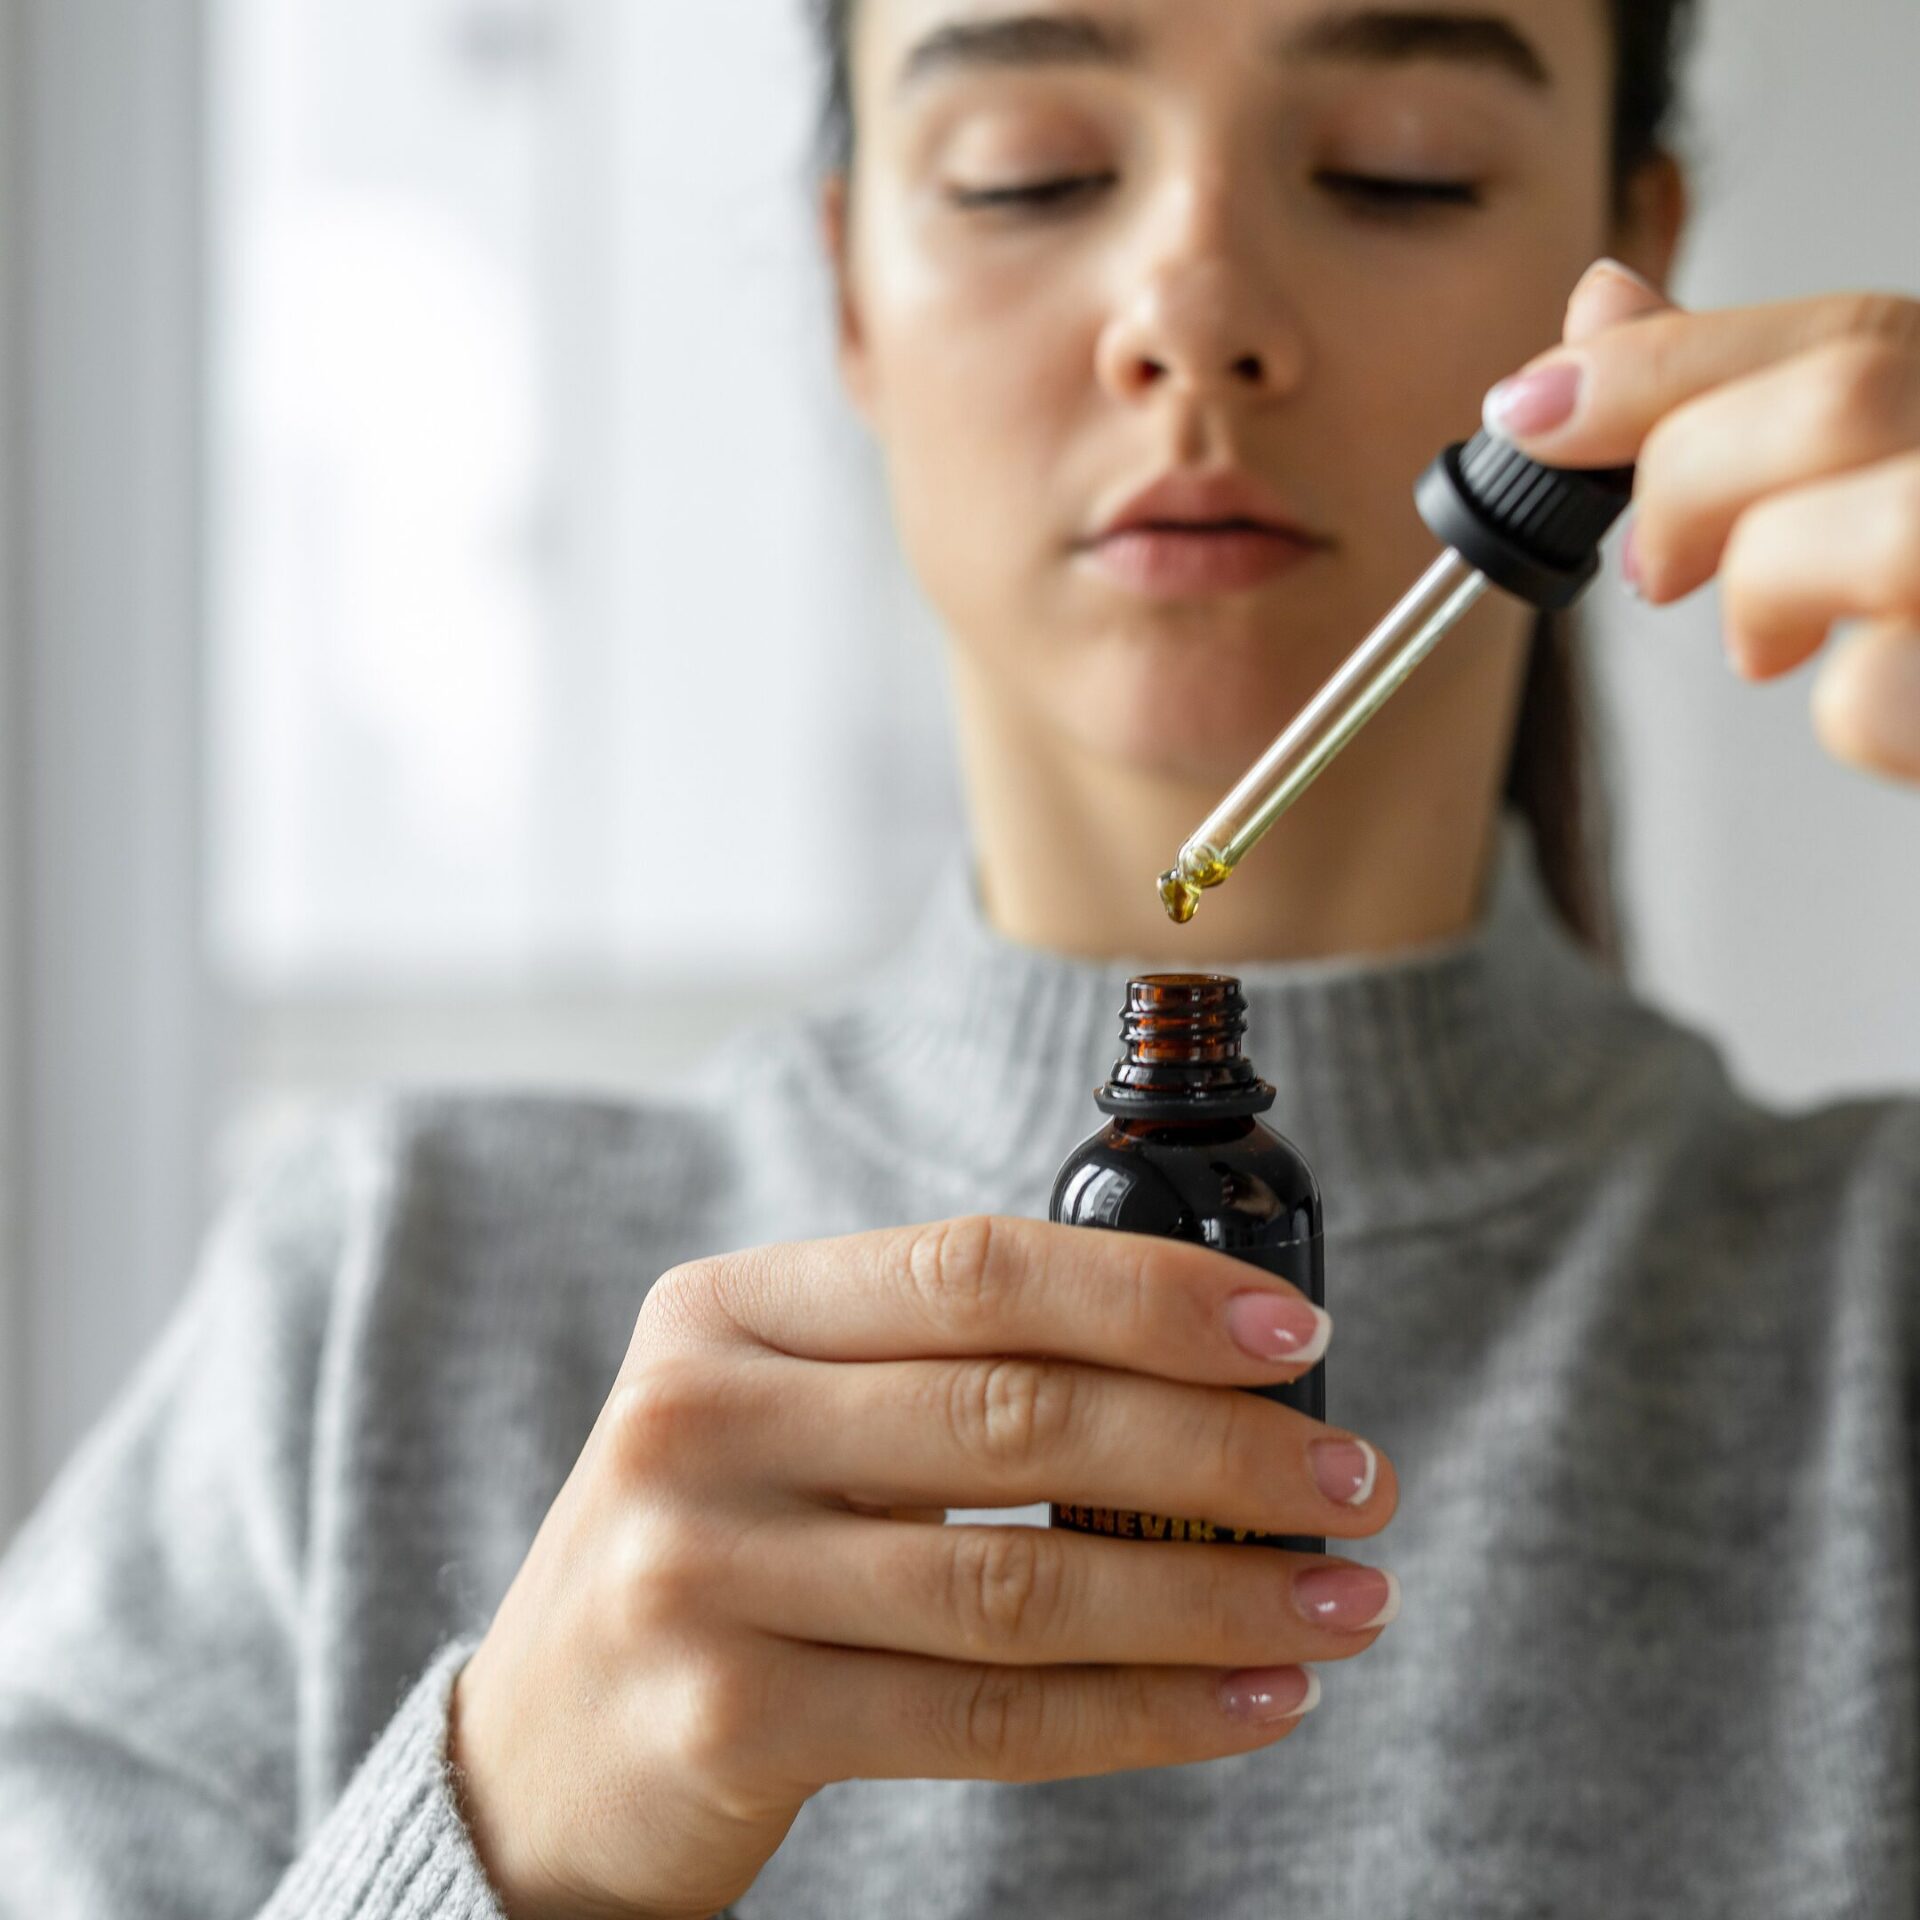 CBD Oil Benefits: Know Its Uses and Side Effects